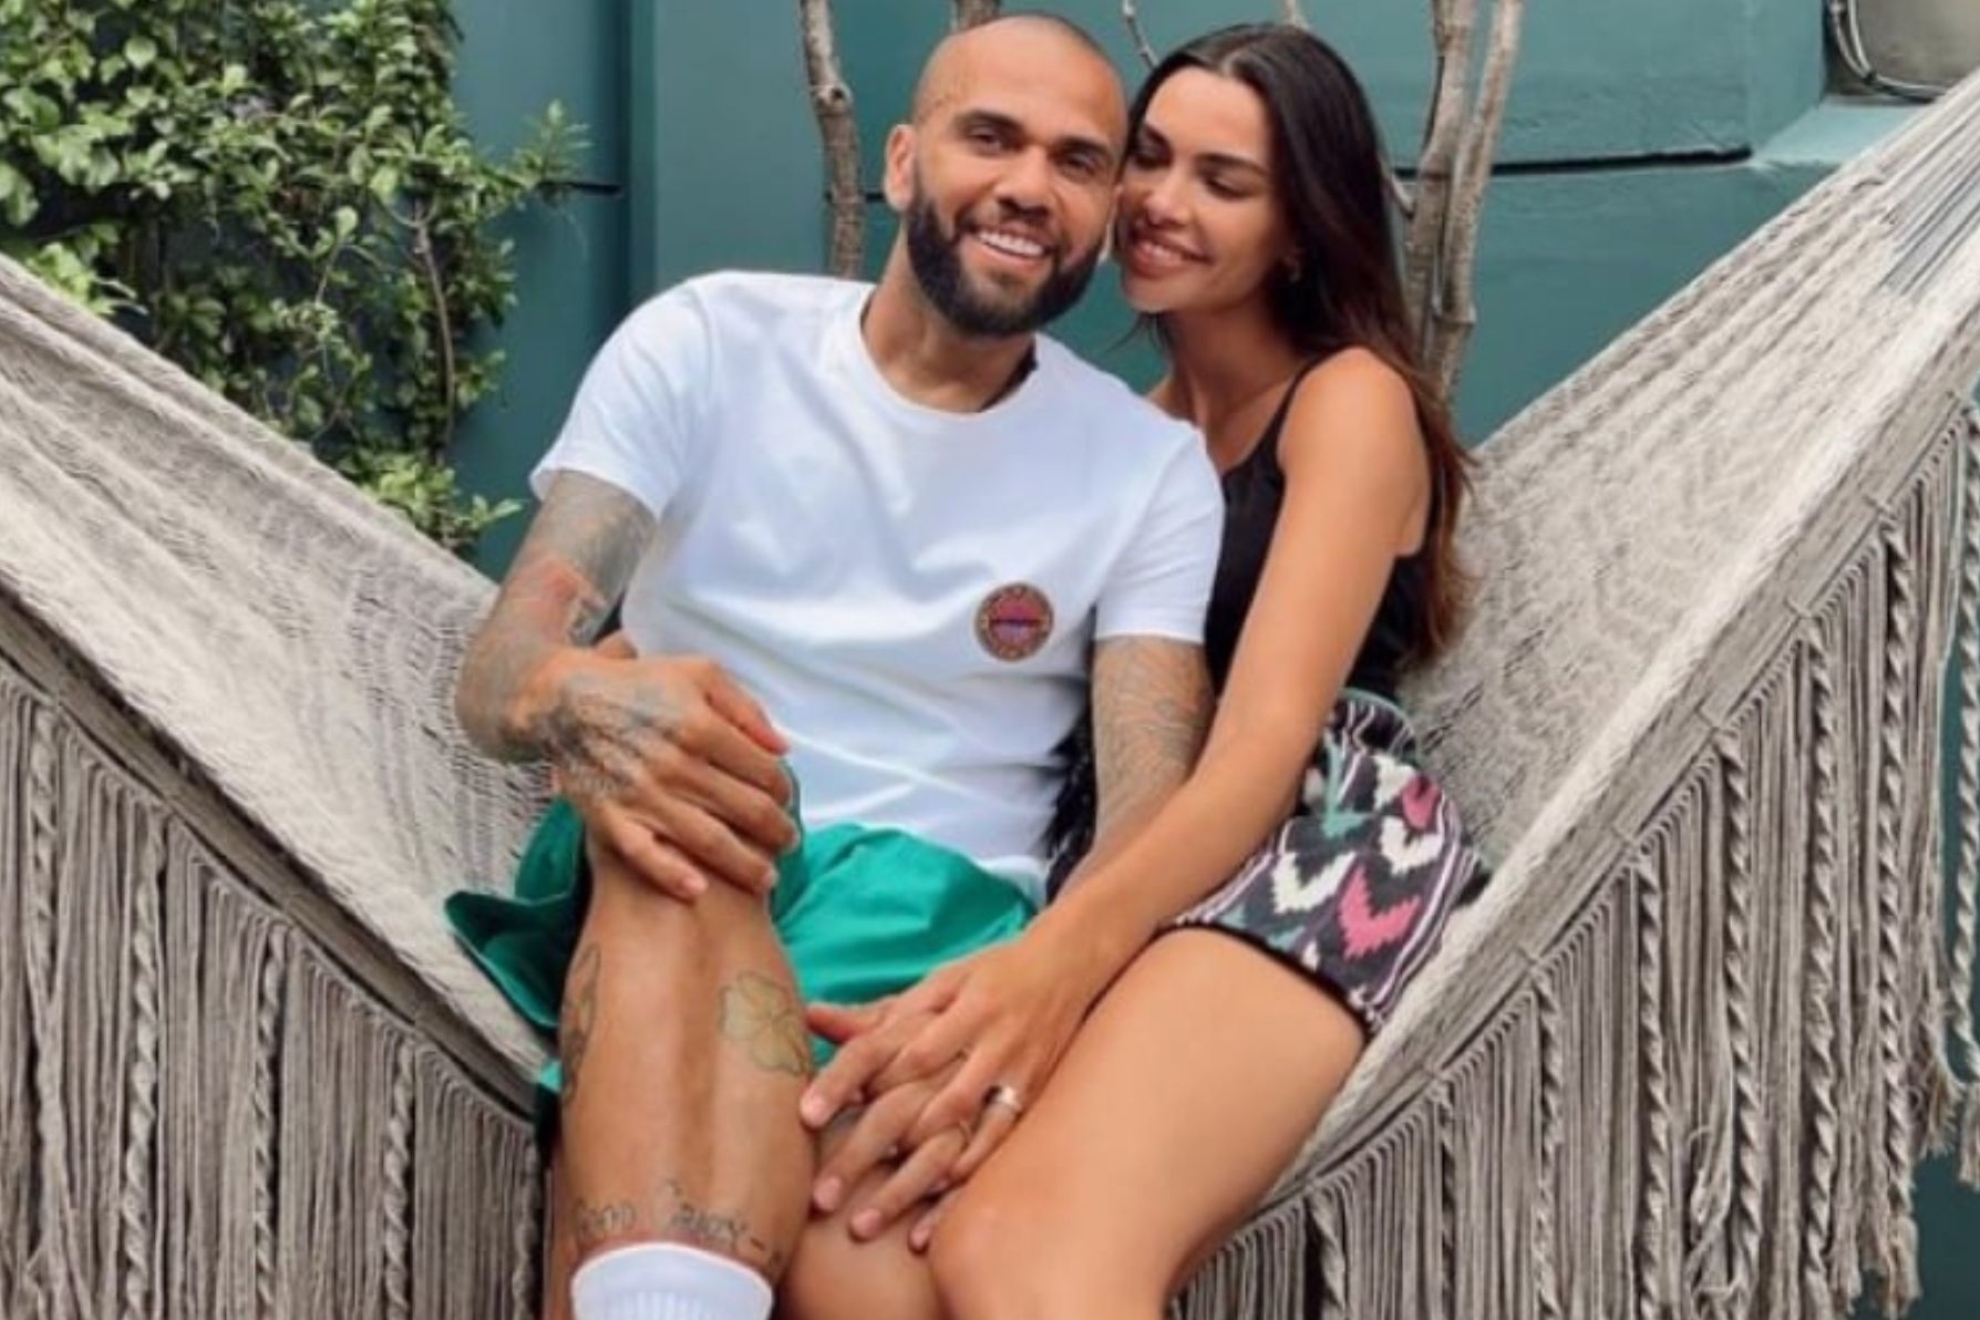 Dani Alves asks wife Joana Sanz to post a picture of them together holding hands